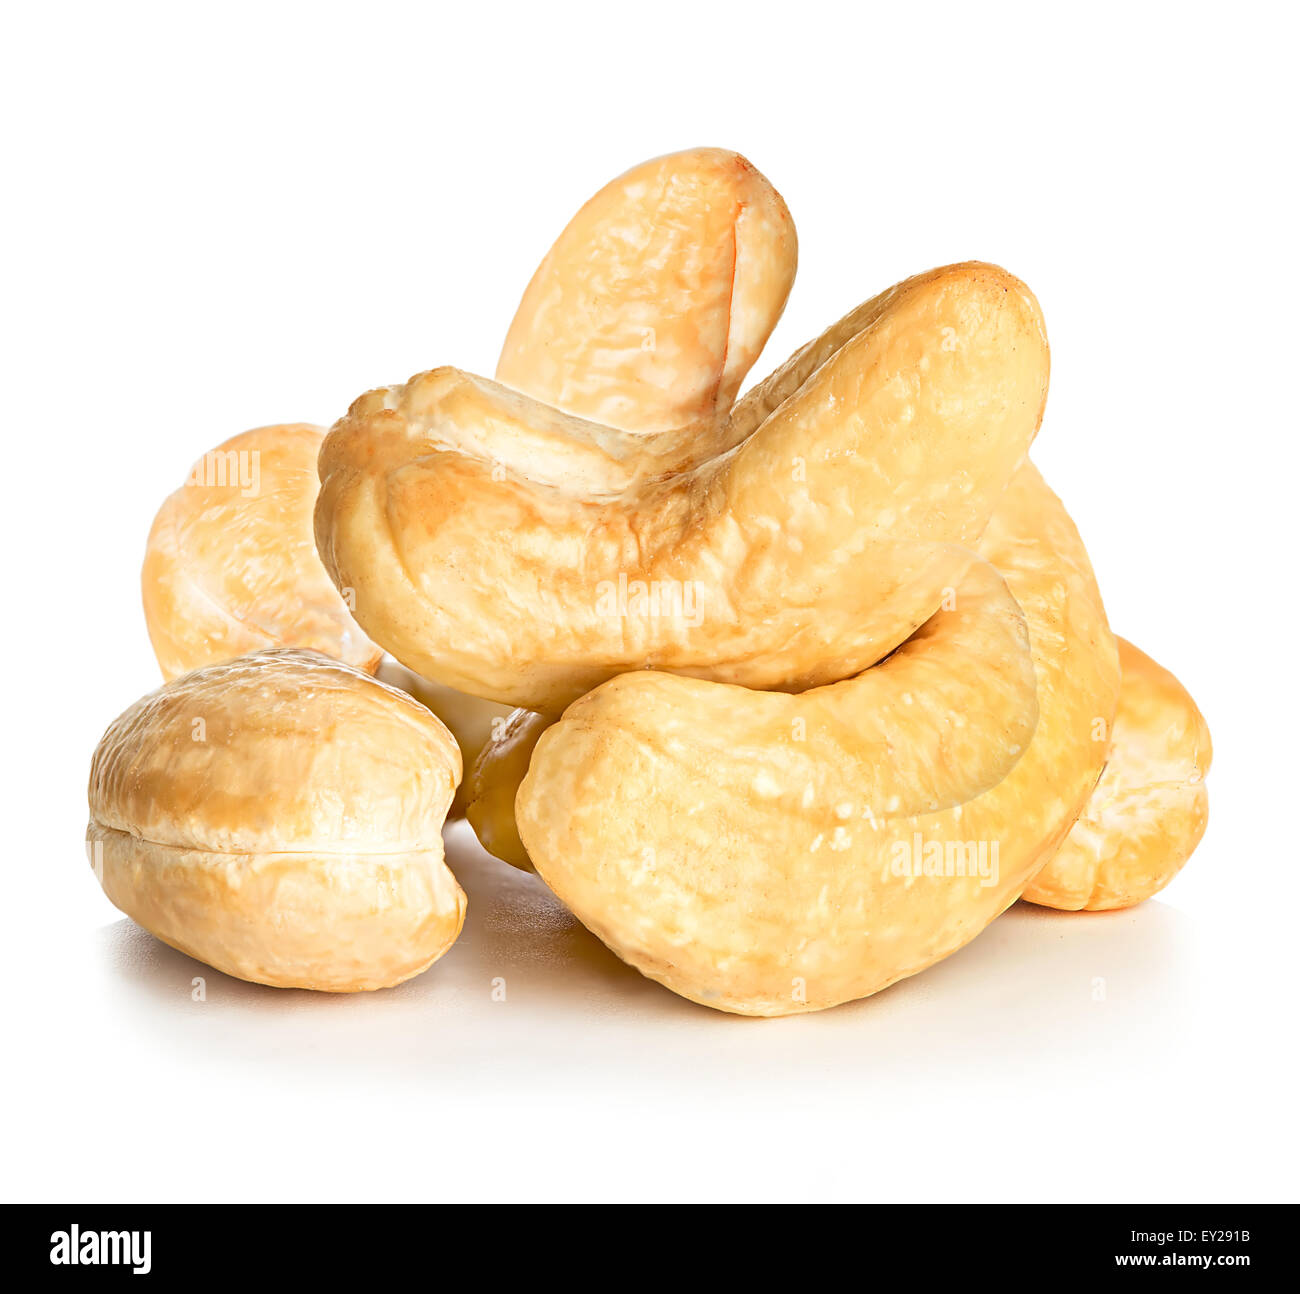 Cashews nuts isolated on a white background Stock Photo